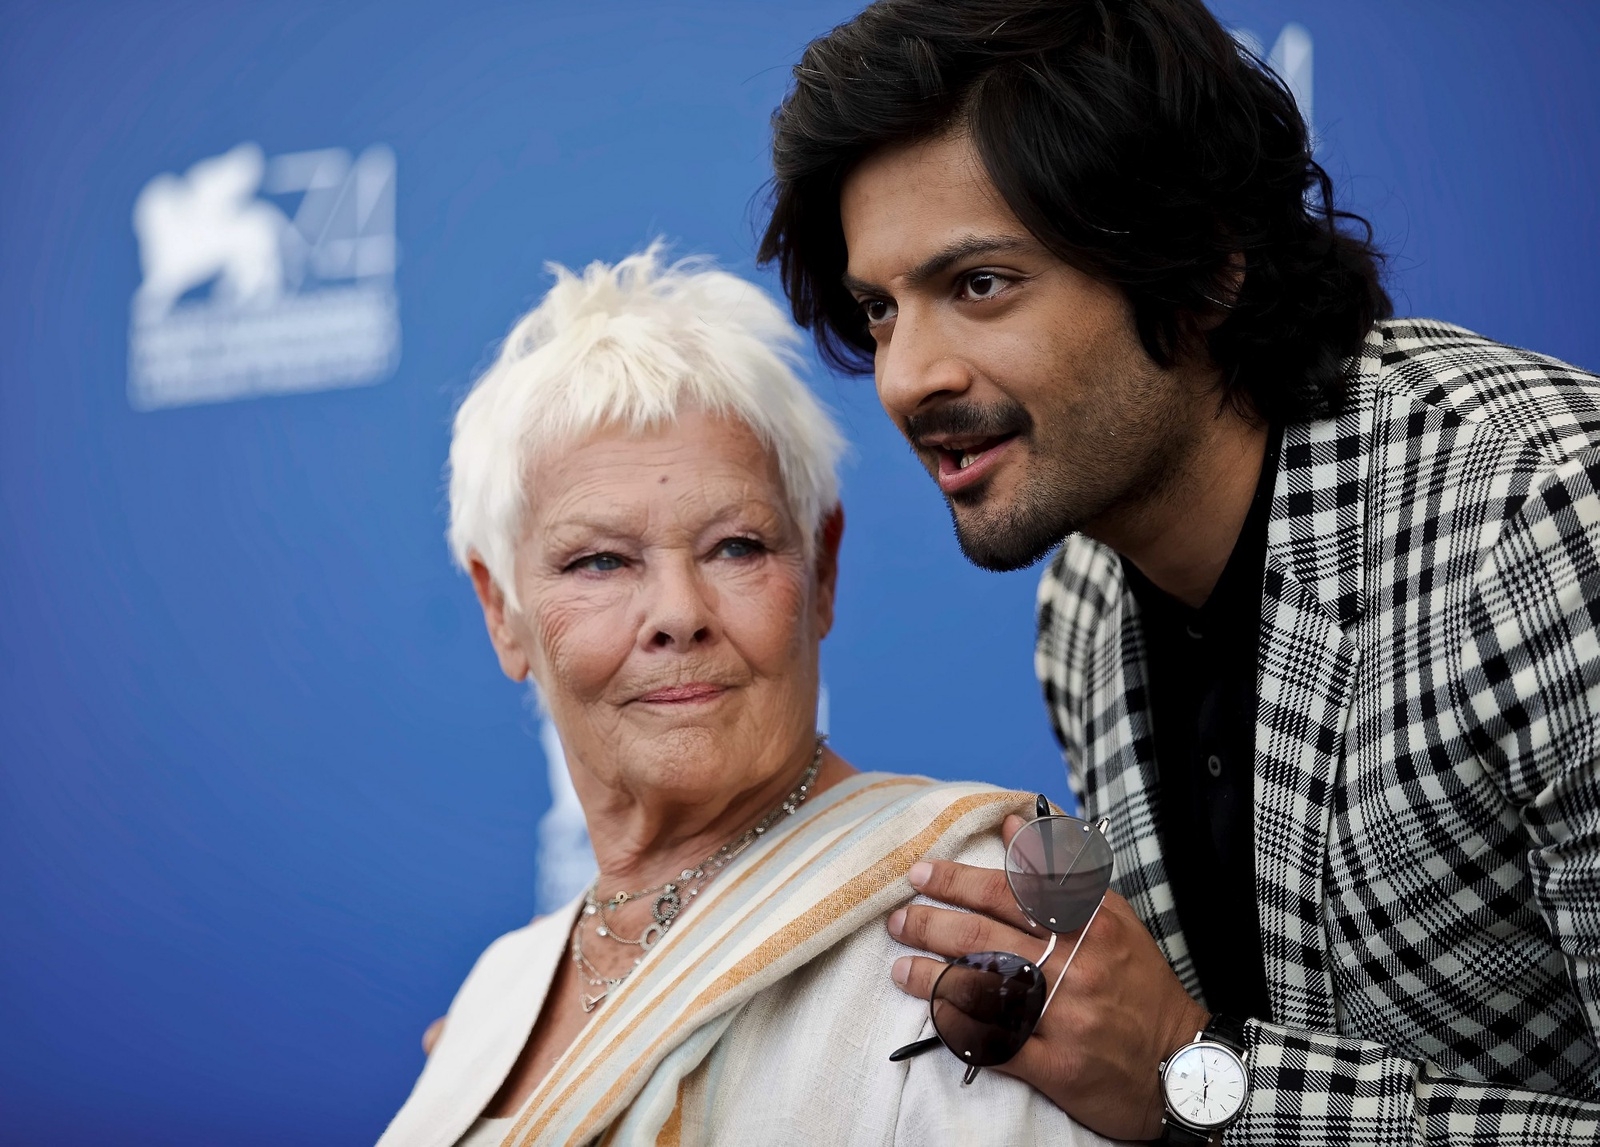 Actors Judi Dench, left, and Ali Fazal pose during a photo call for the film "Victoria And Abdul" at the 74th Venice Film Festival in Venice, Italy, Sunday, Sept. 3, 2017. (AP Photo/Domenico Stinellis)